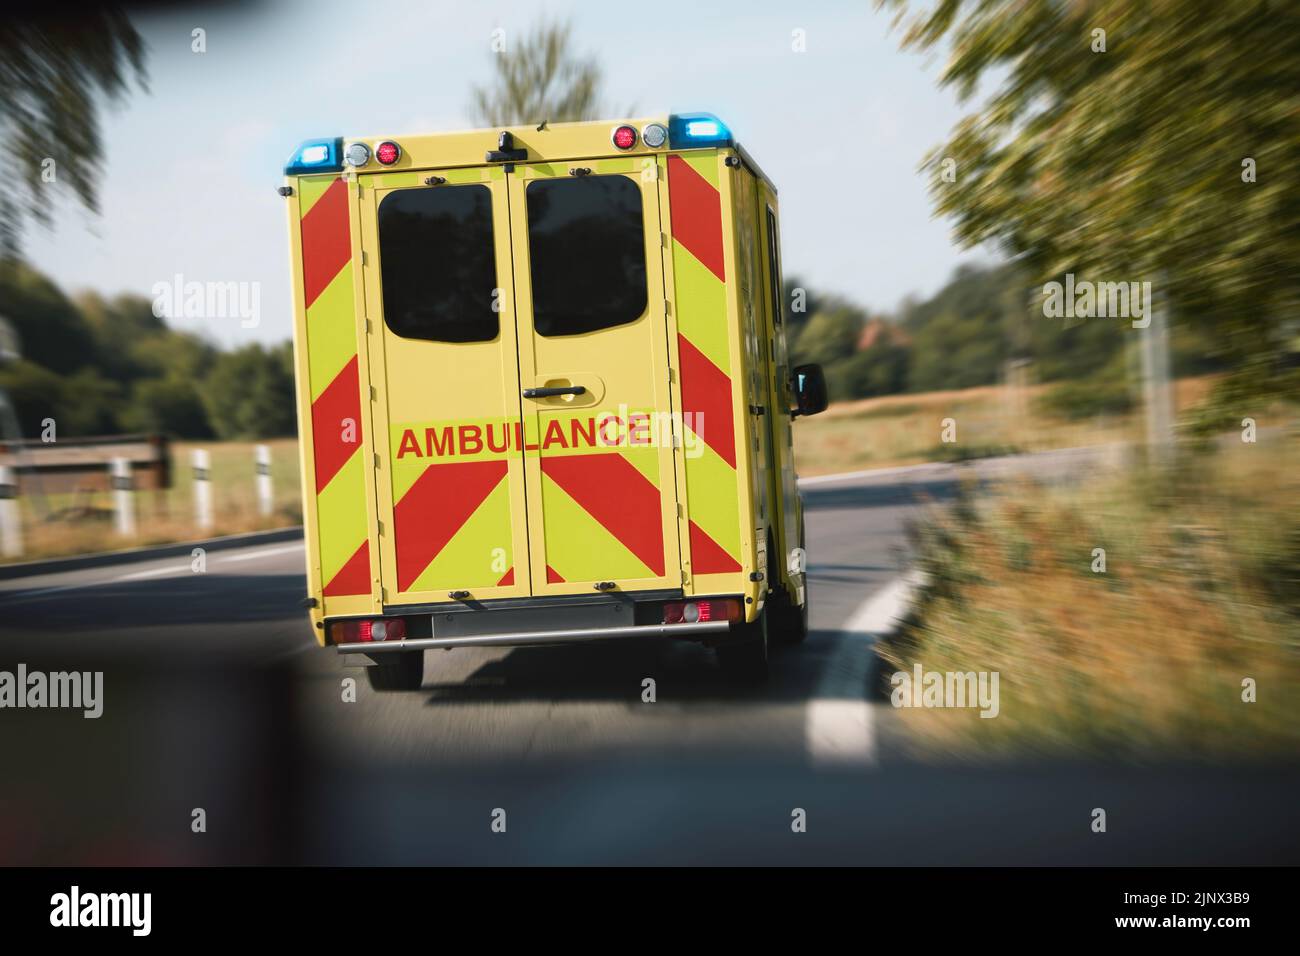 Ambulance car of emergency medical service on road in blurred motion. Themes rescue, urgency and health care. Stock Photo